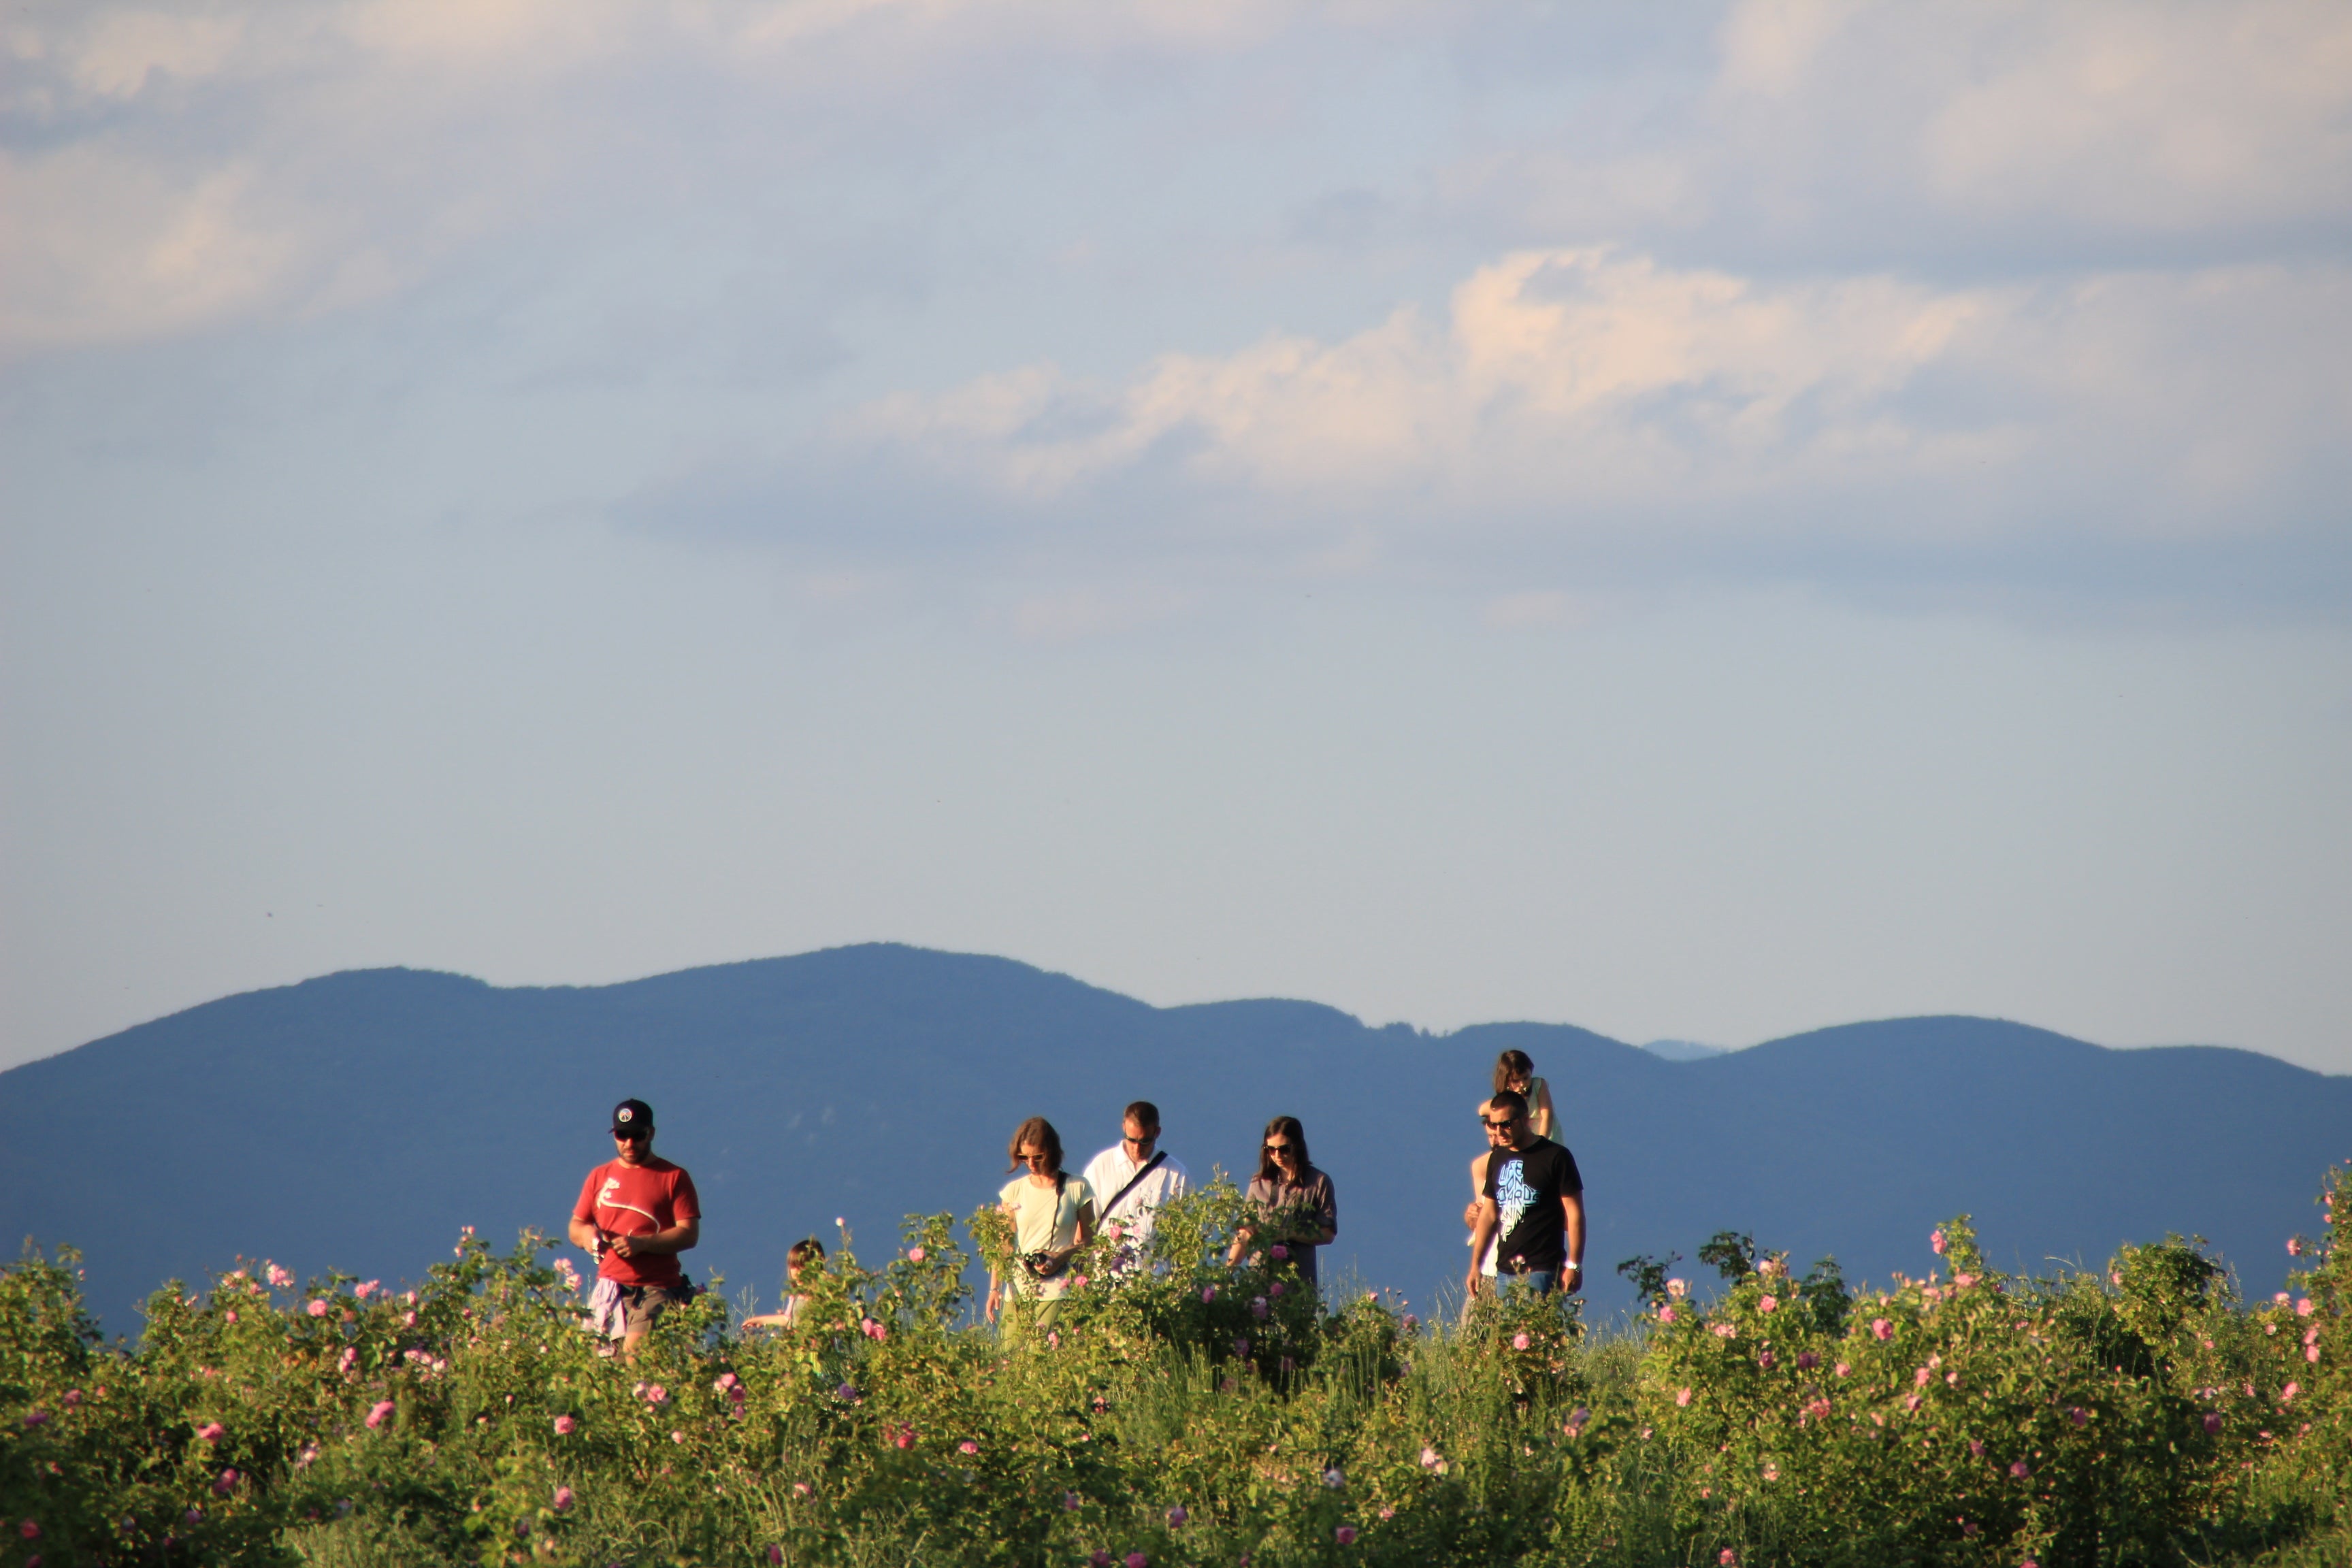 A group of people walking in a field of flowers.